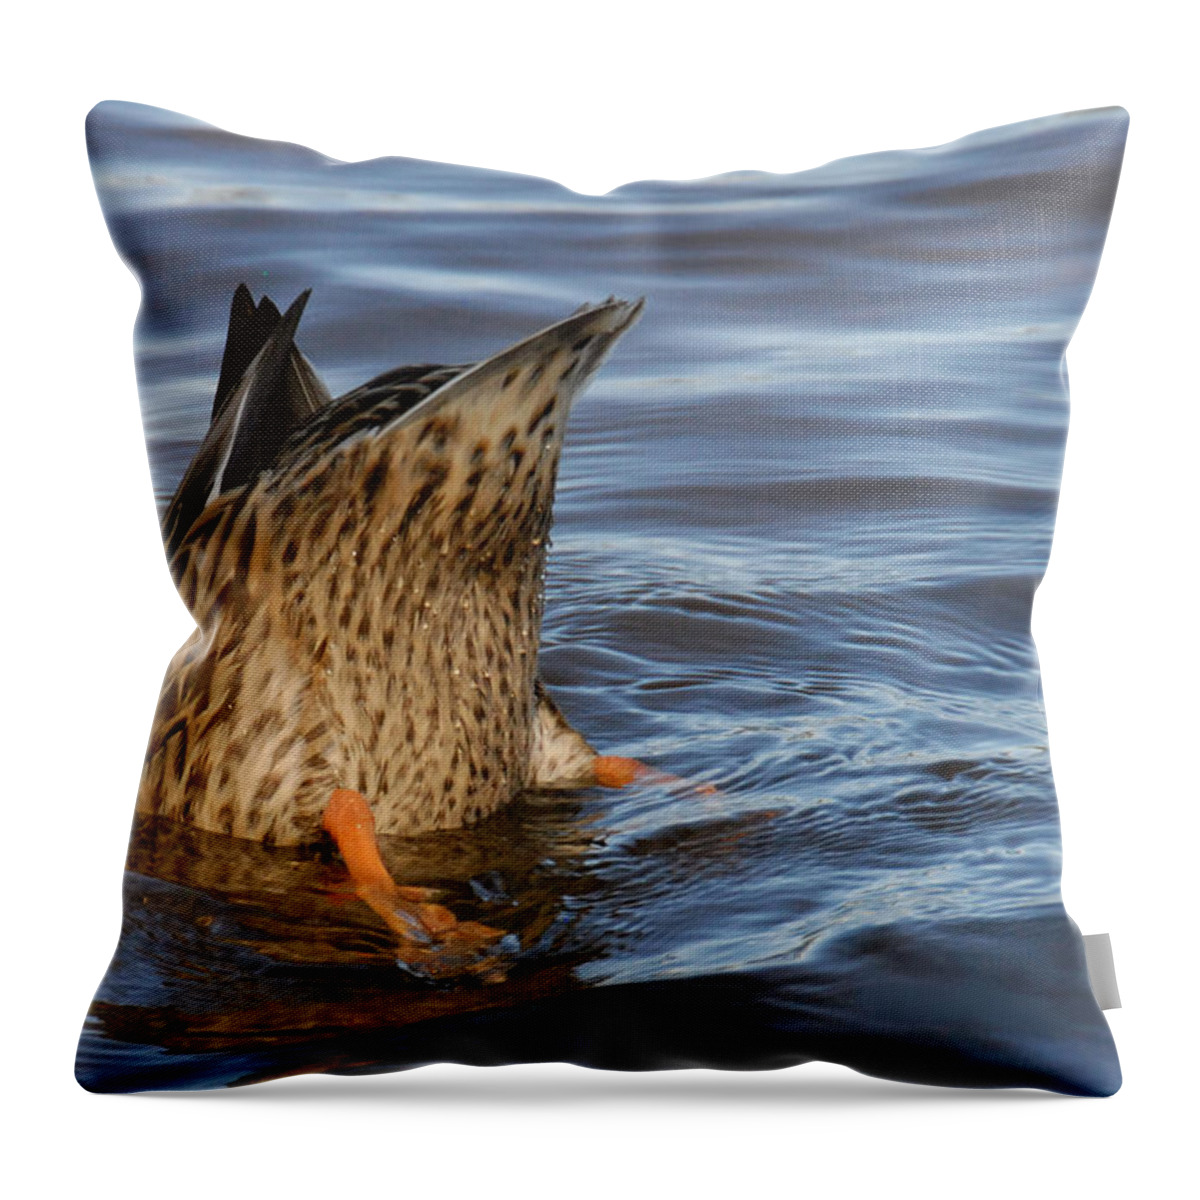 Nature Throw Pillow featuring the photograph Bottom's Up by Cindy Manero